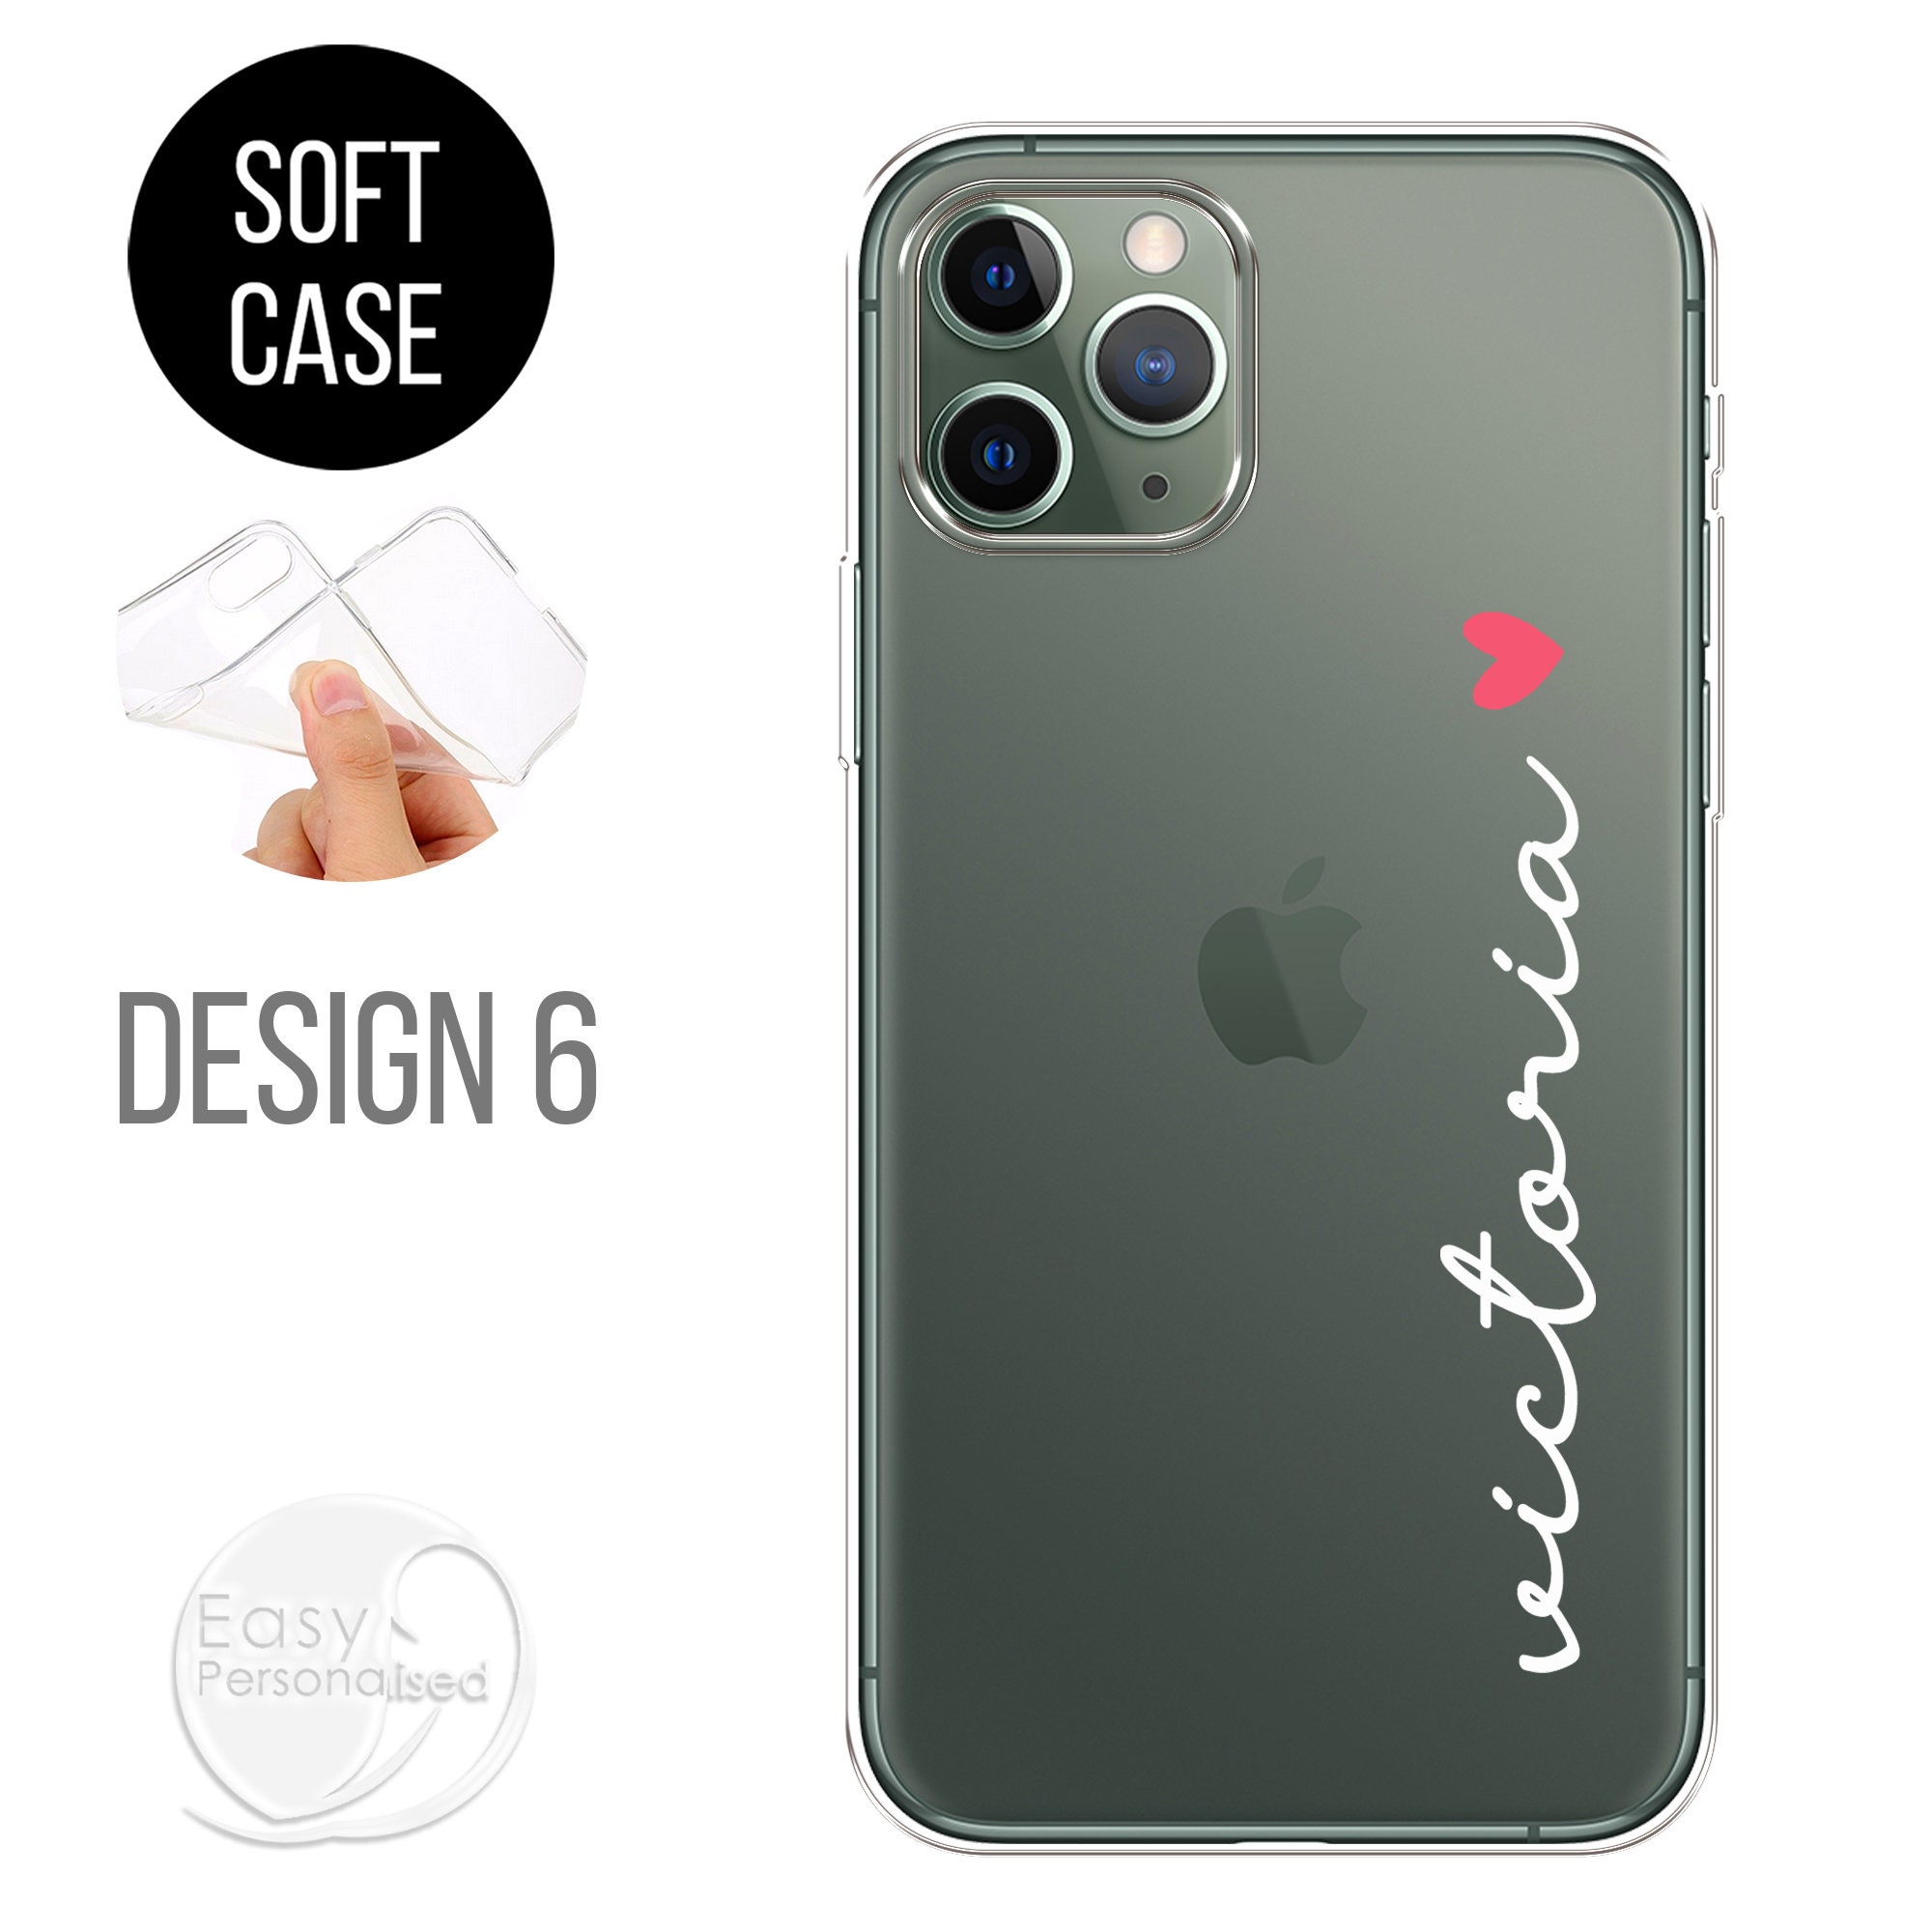 QWZNDZGR Personalized Customized Name Letter Phone Case For iPhone